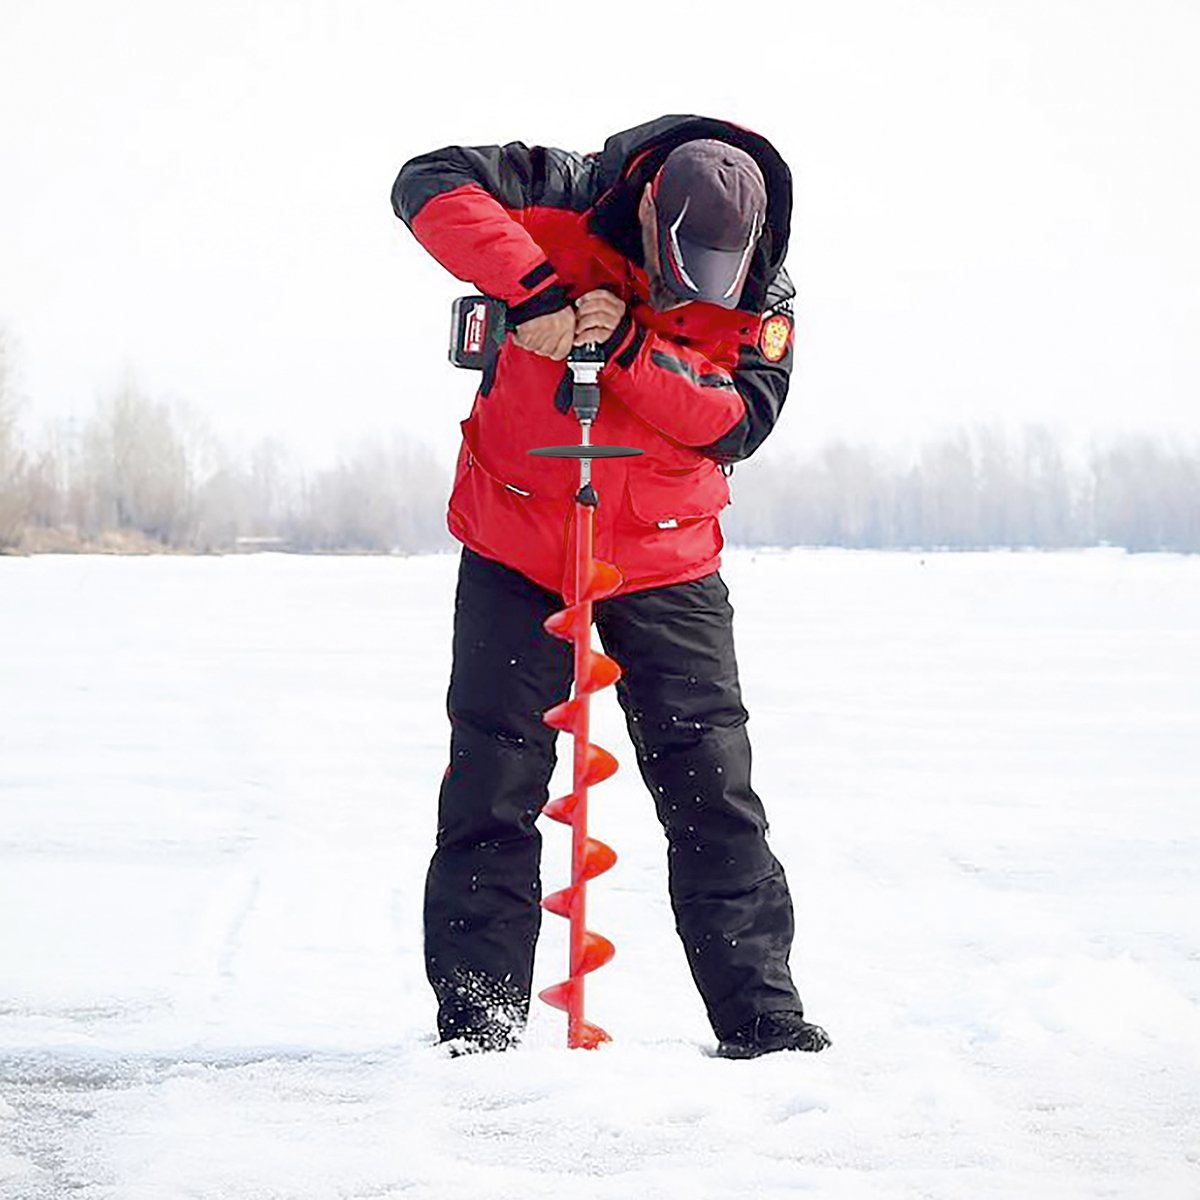 BURAN Professional Ice Fishing Auger with Cordless Drill Adapter – TONAREX